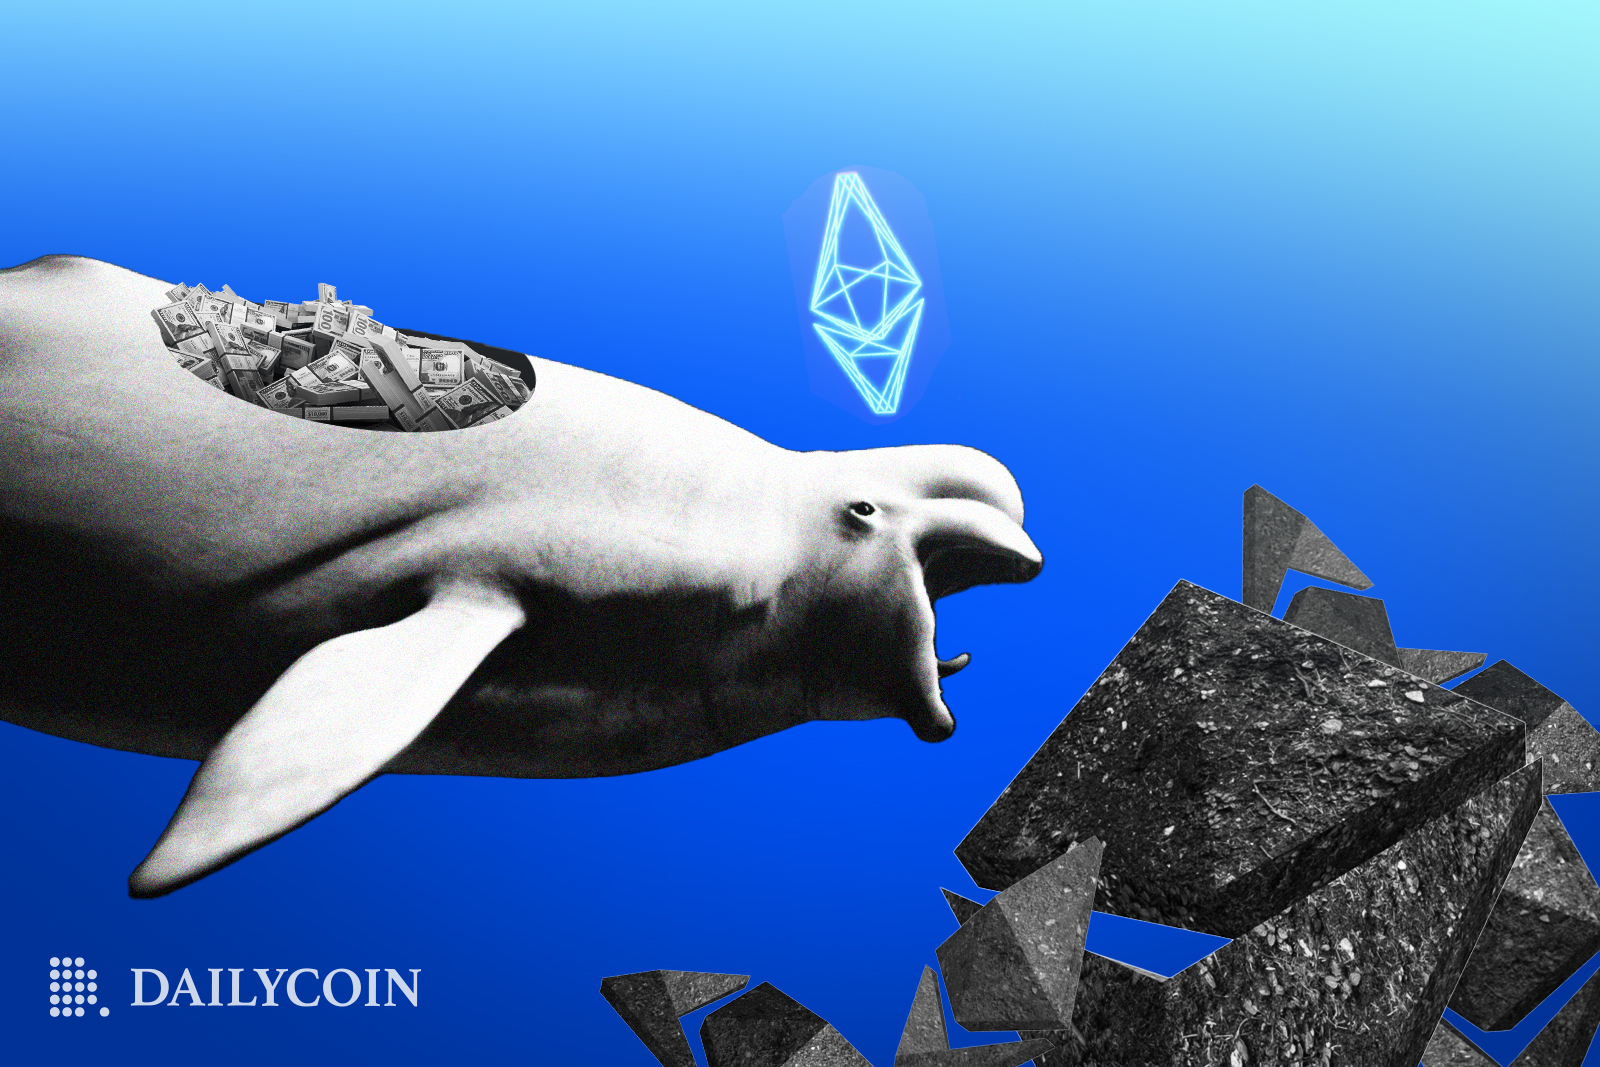 A beluga whale with belly full of cash and blue ethereum logo above head swimming towards black rubish